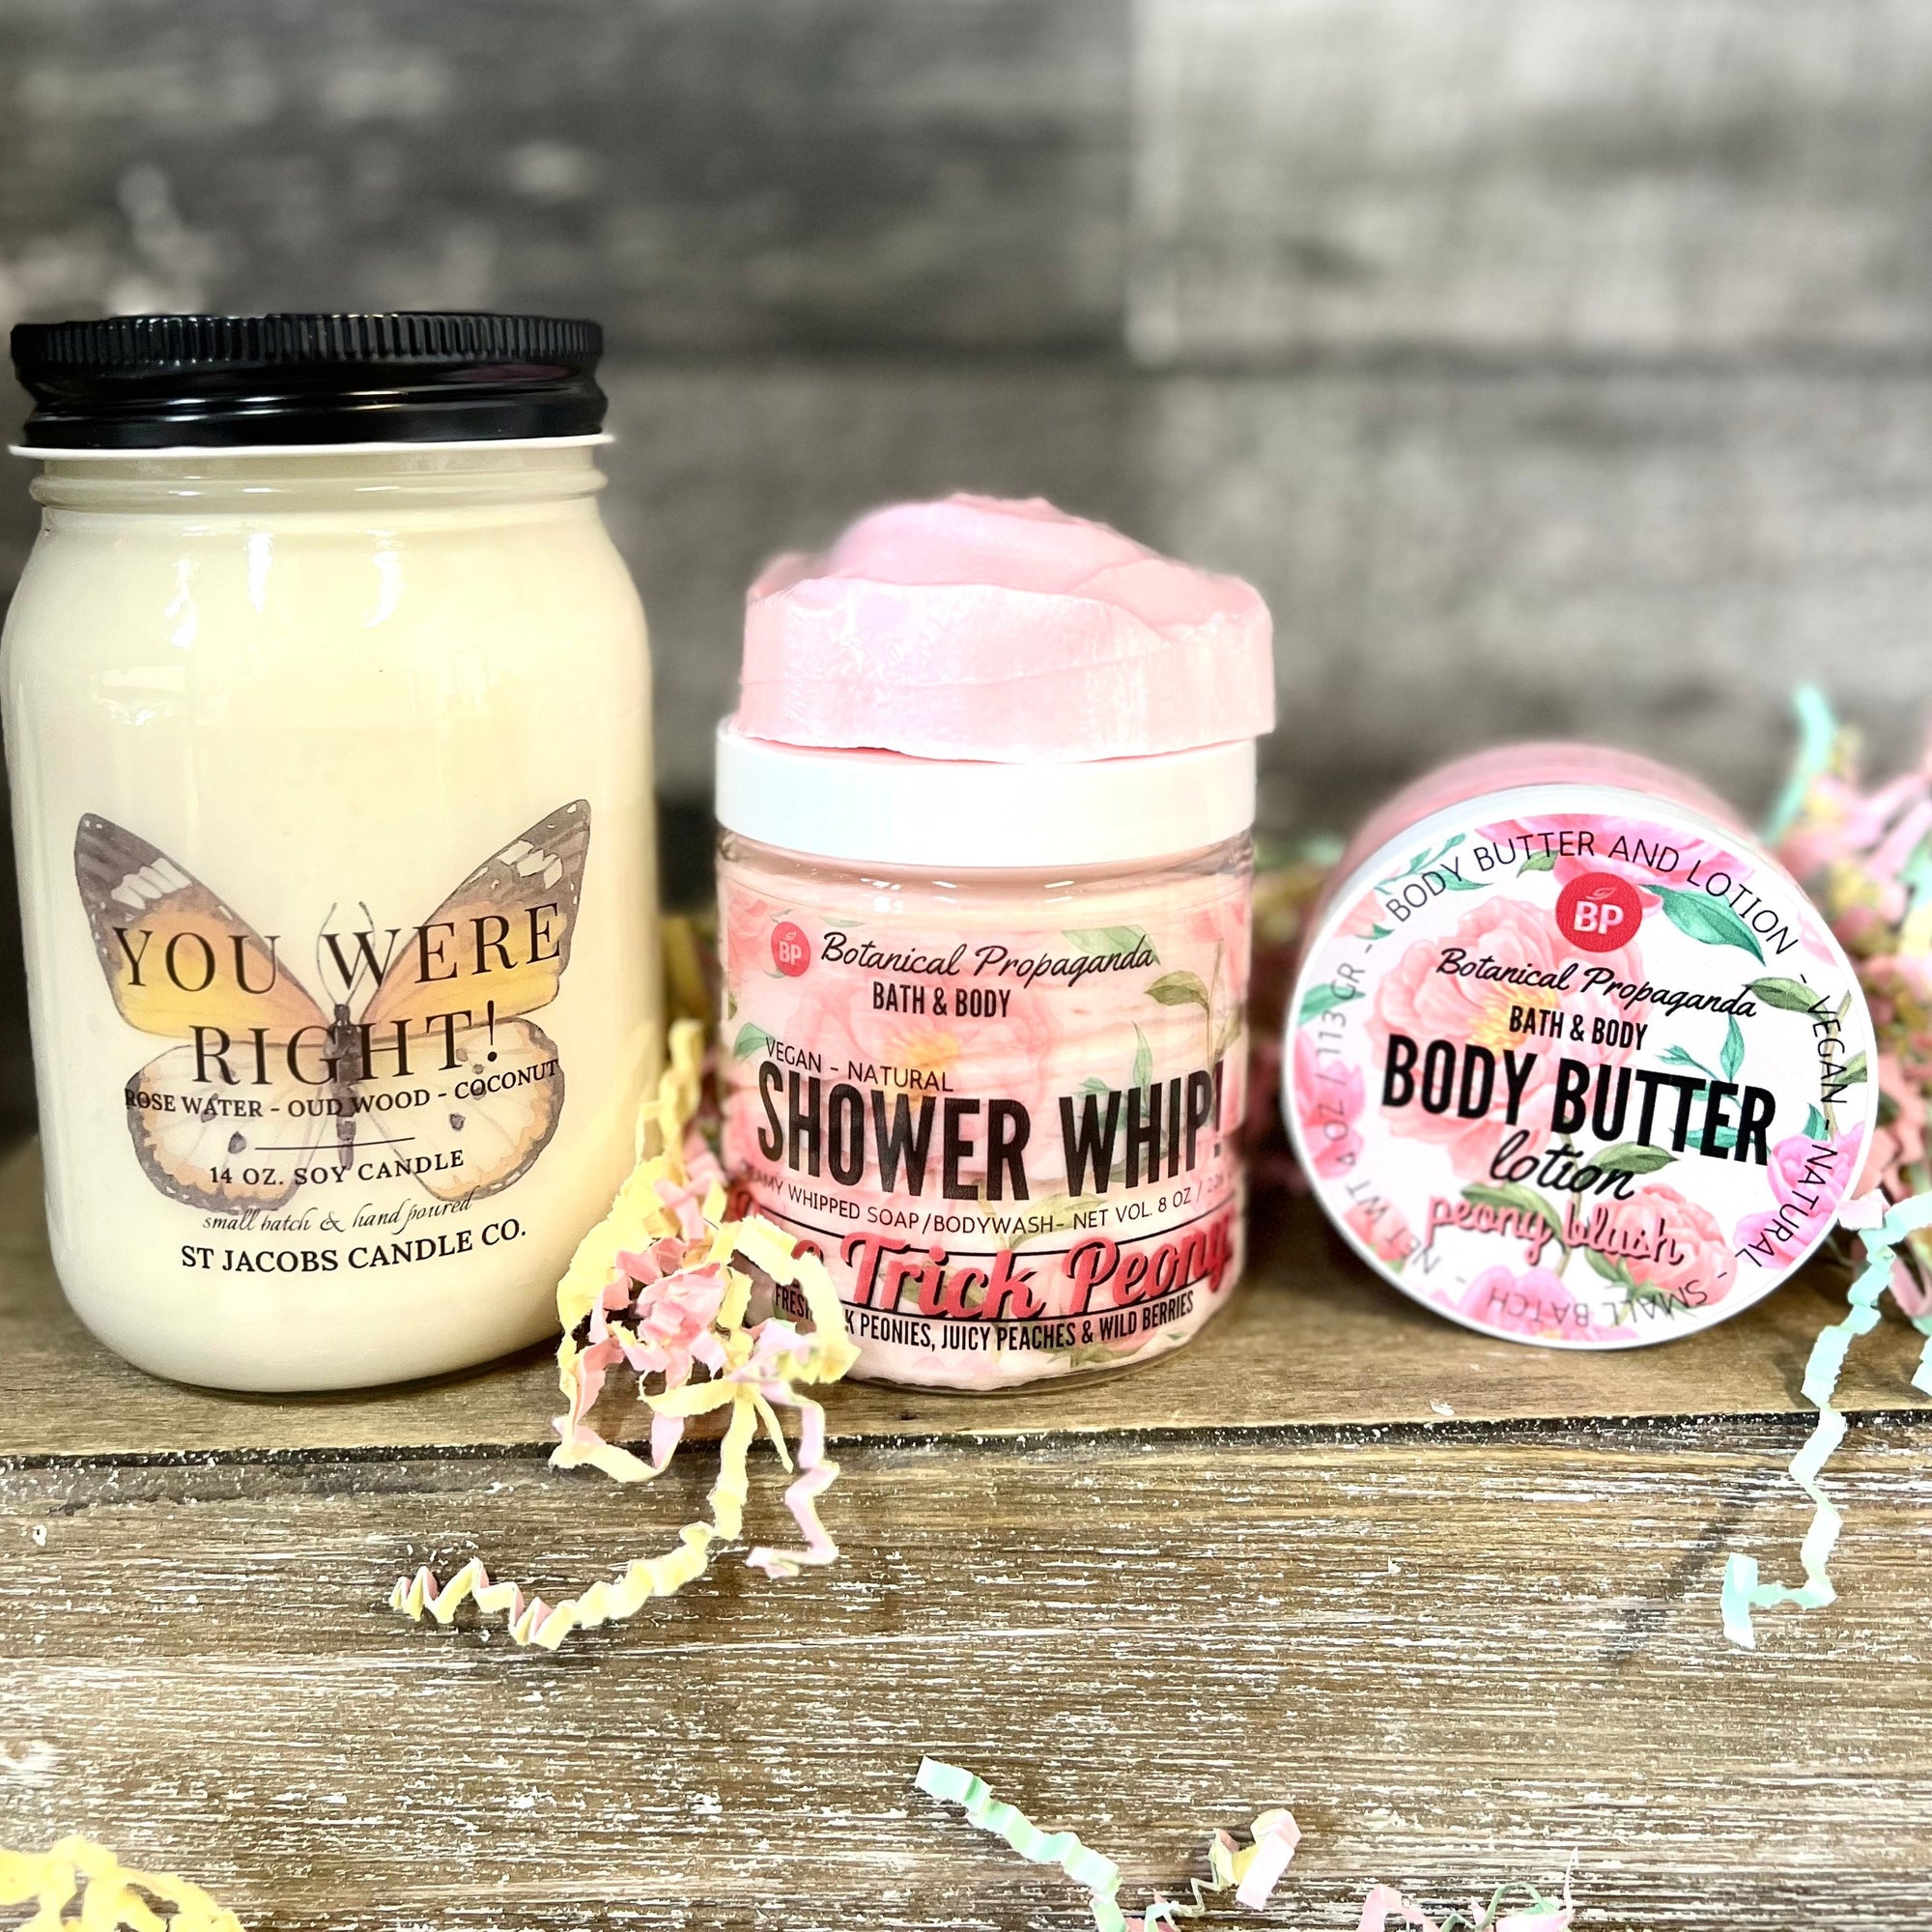 YOU WERE RIGHT - Mother's Day Box